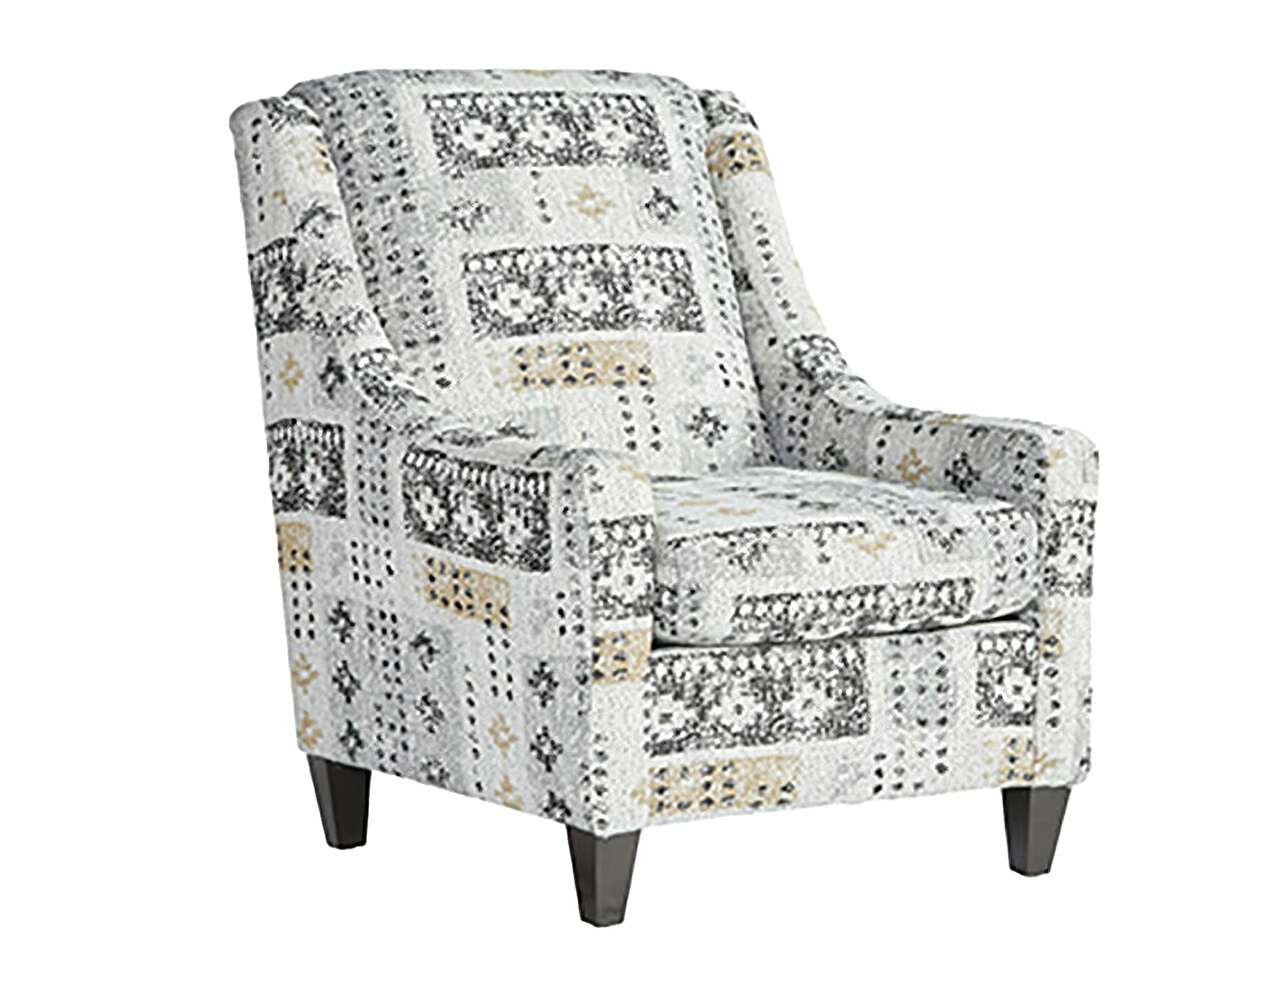 1500 Occasional Chair: Tupper Onyx $450.99